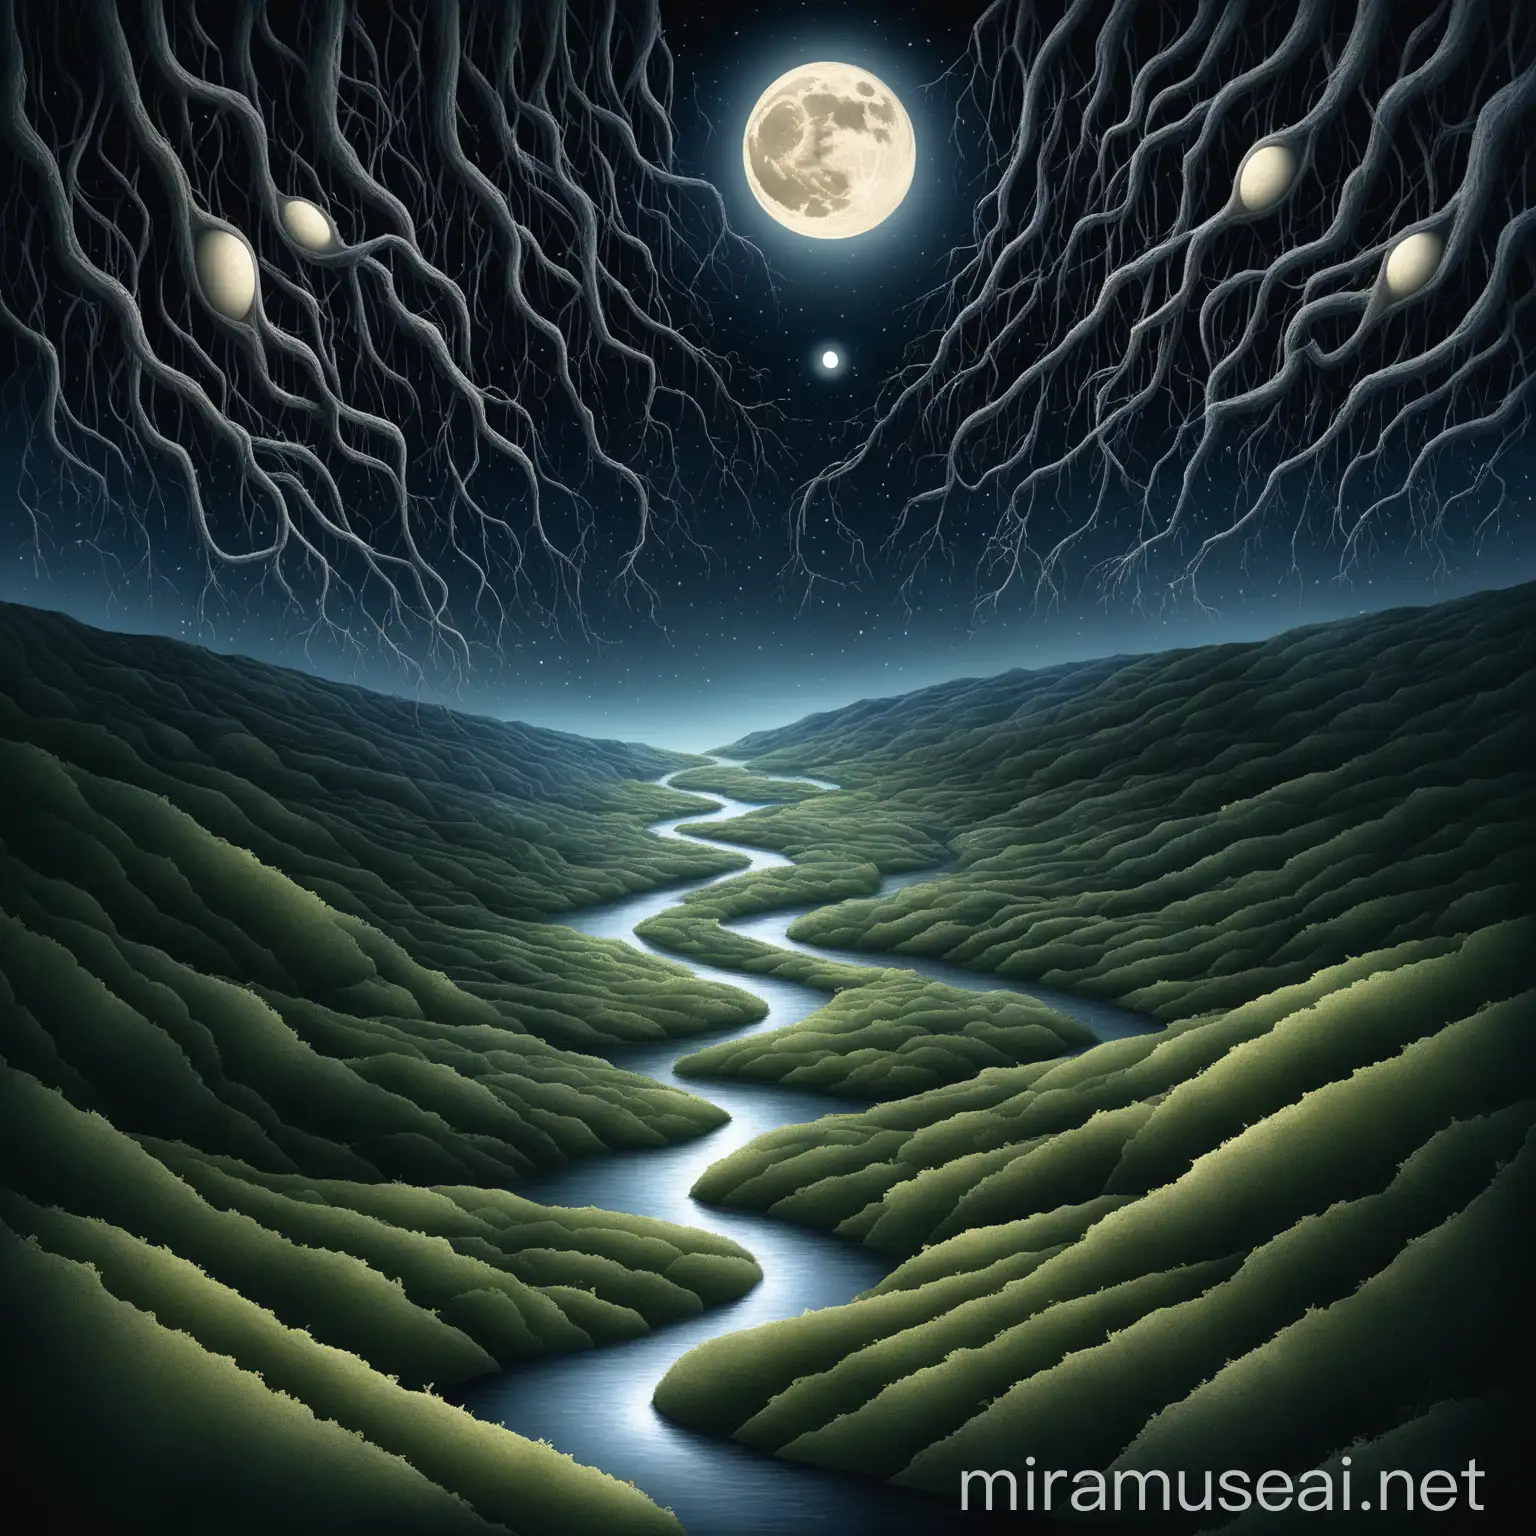 Ethereal Night Landscape with Peripapillary Atrophy and Retinal Nerve Fiber Defect River